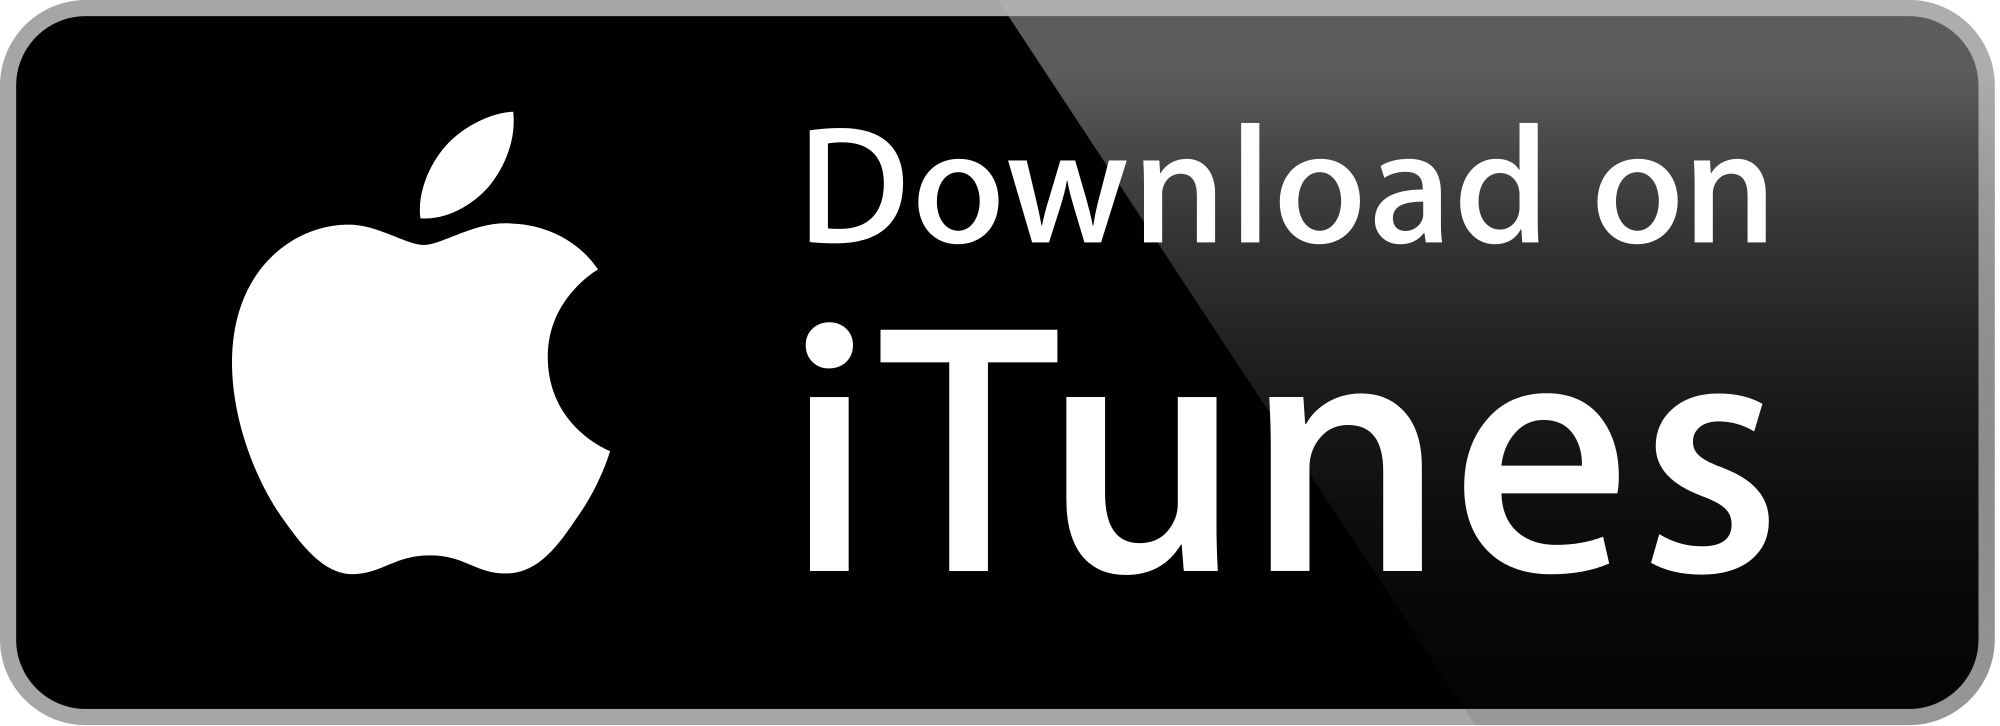 2000px-Download_on_iTunes.svg.png